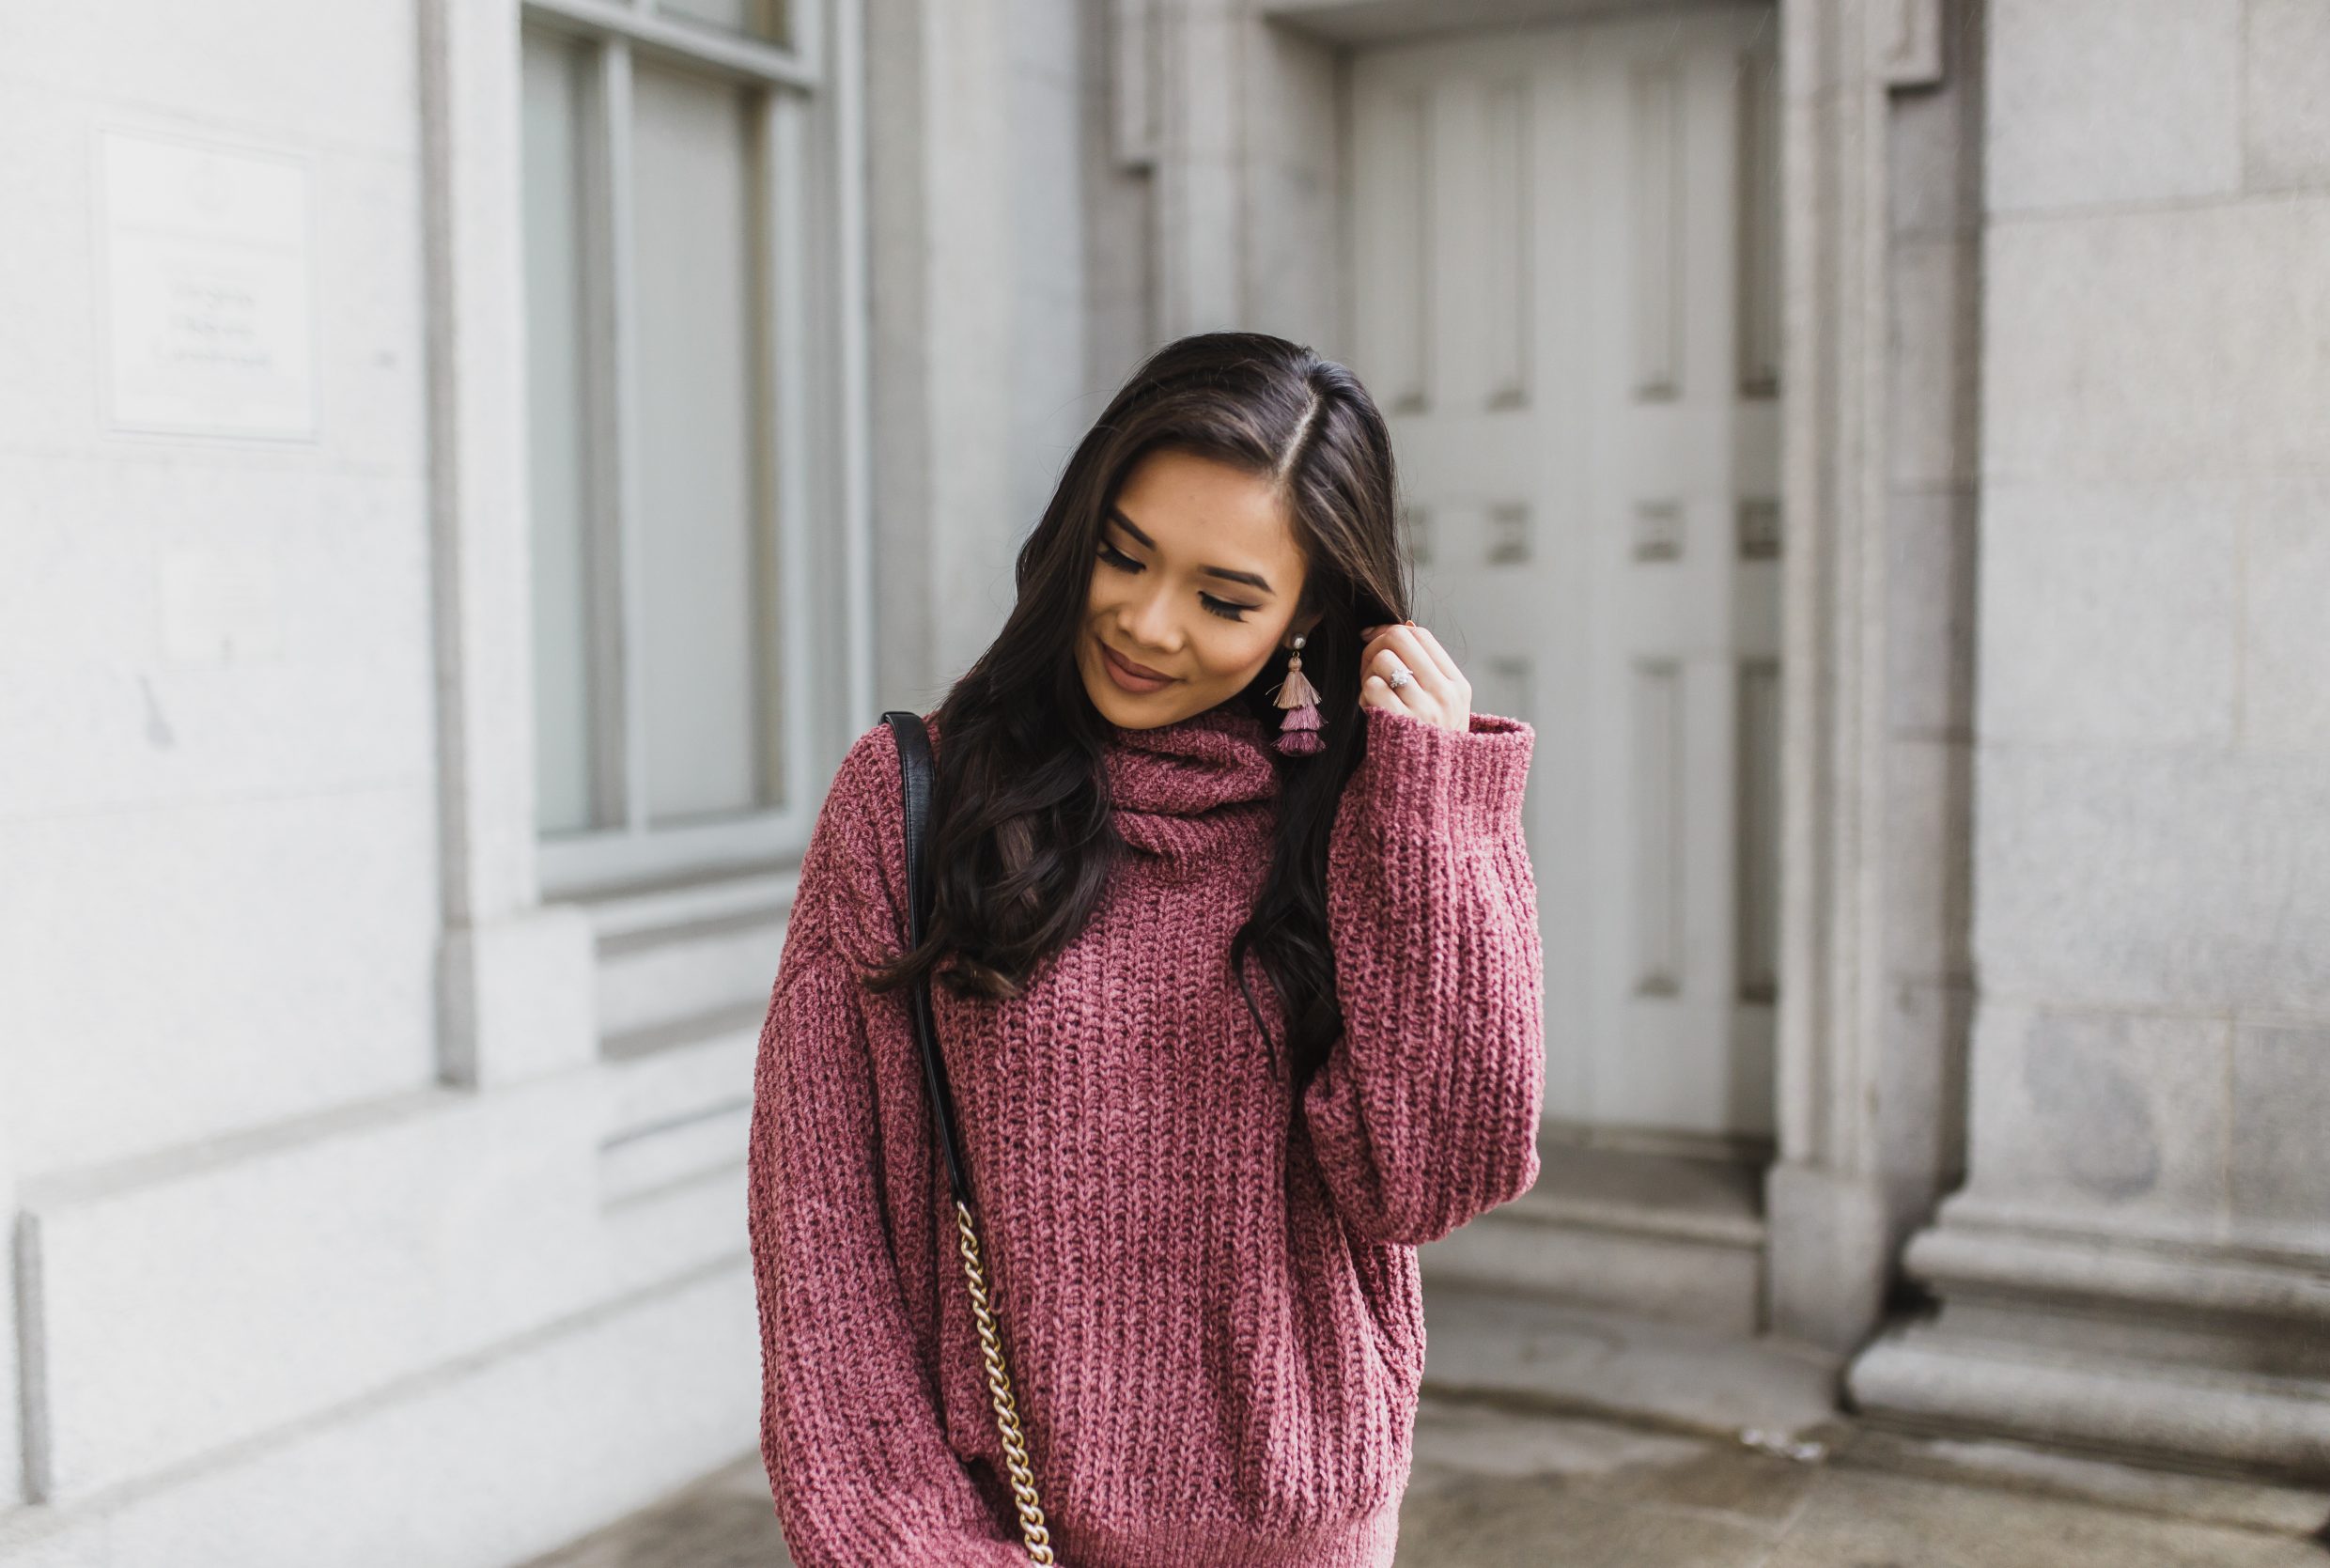 Mauve cowl neck sweater with ombre tassel earrings